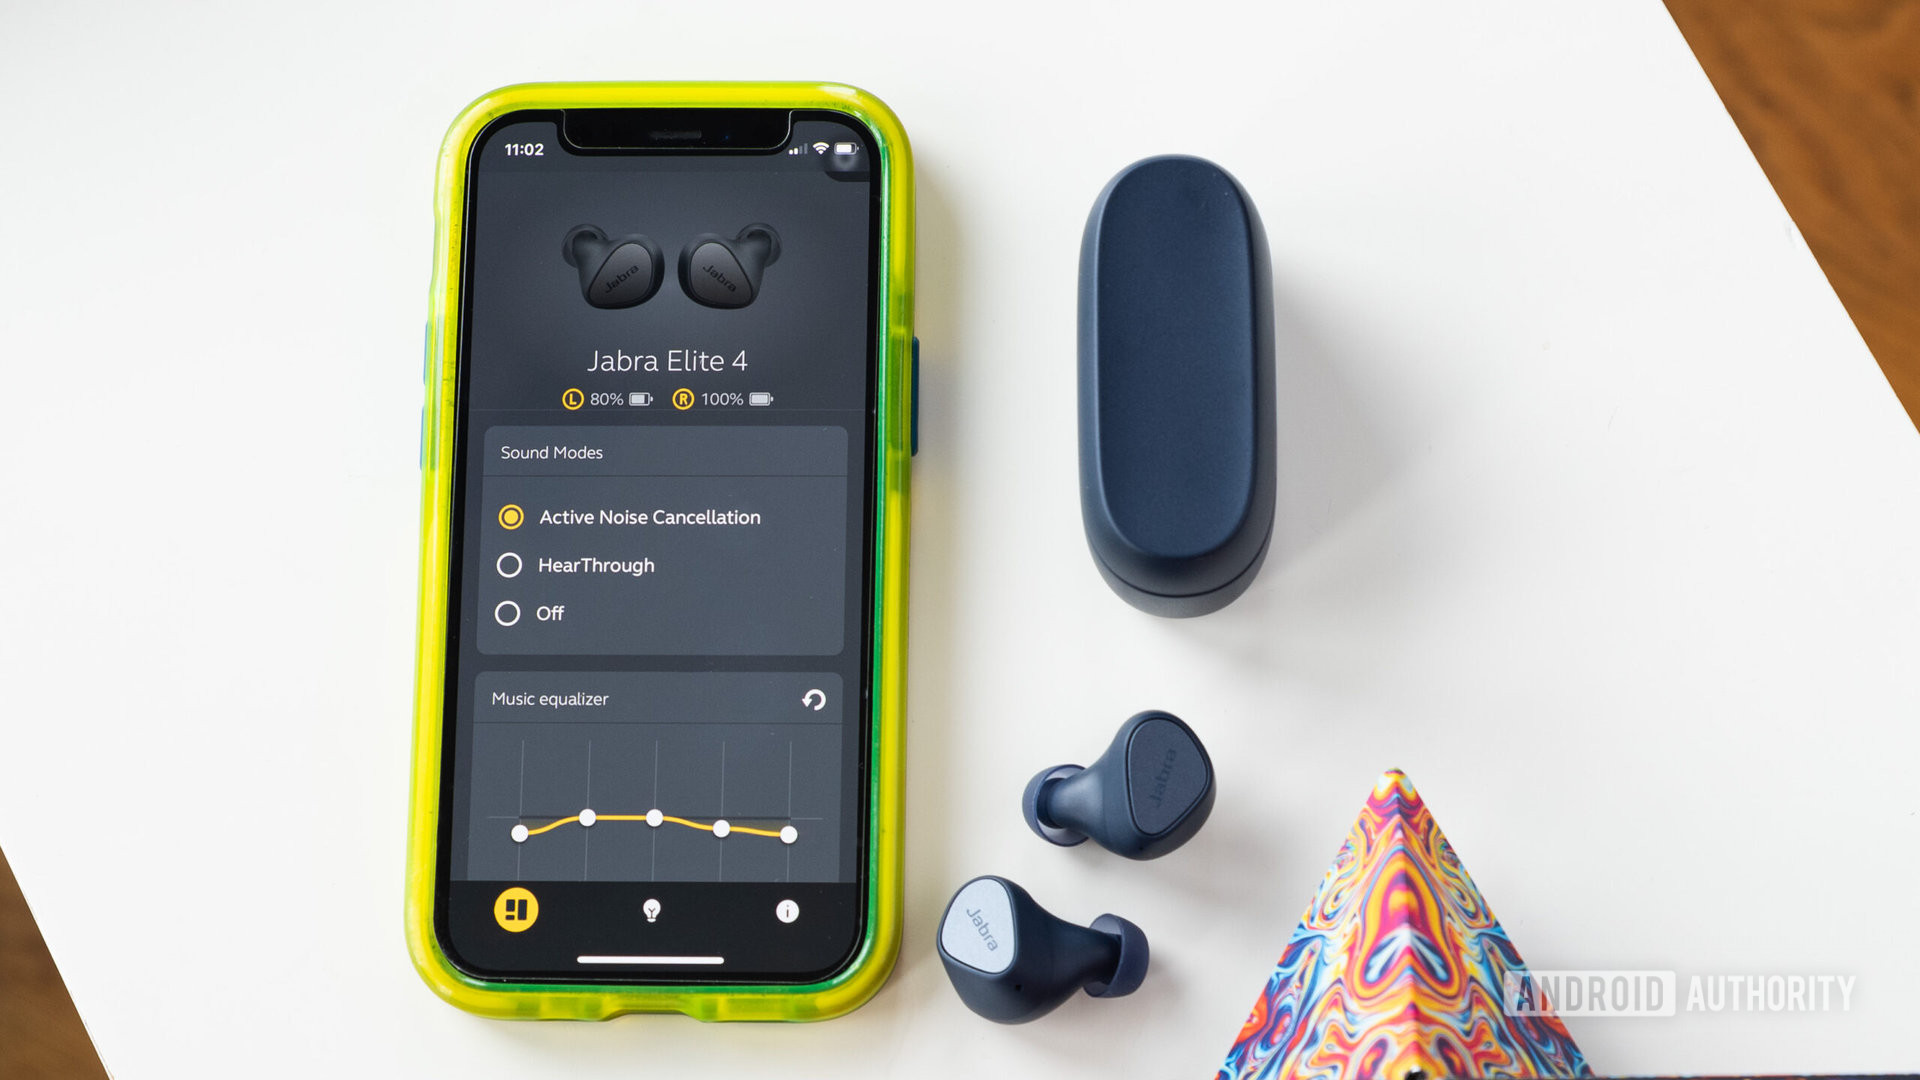 The Jabra Elite 4 wireless noise cancelling earbuds next to an iPhone displaying the MySound+ app.